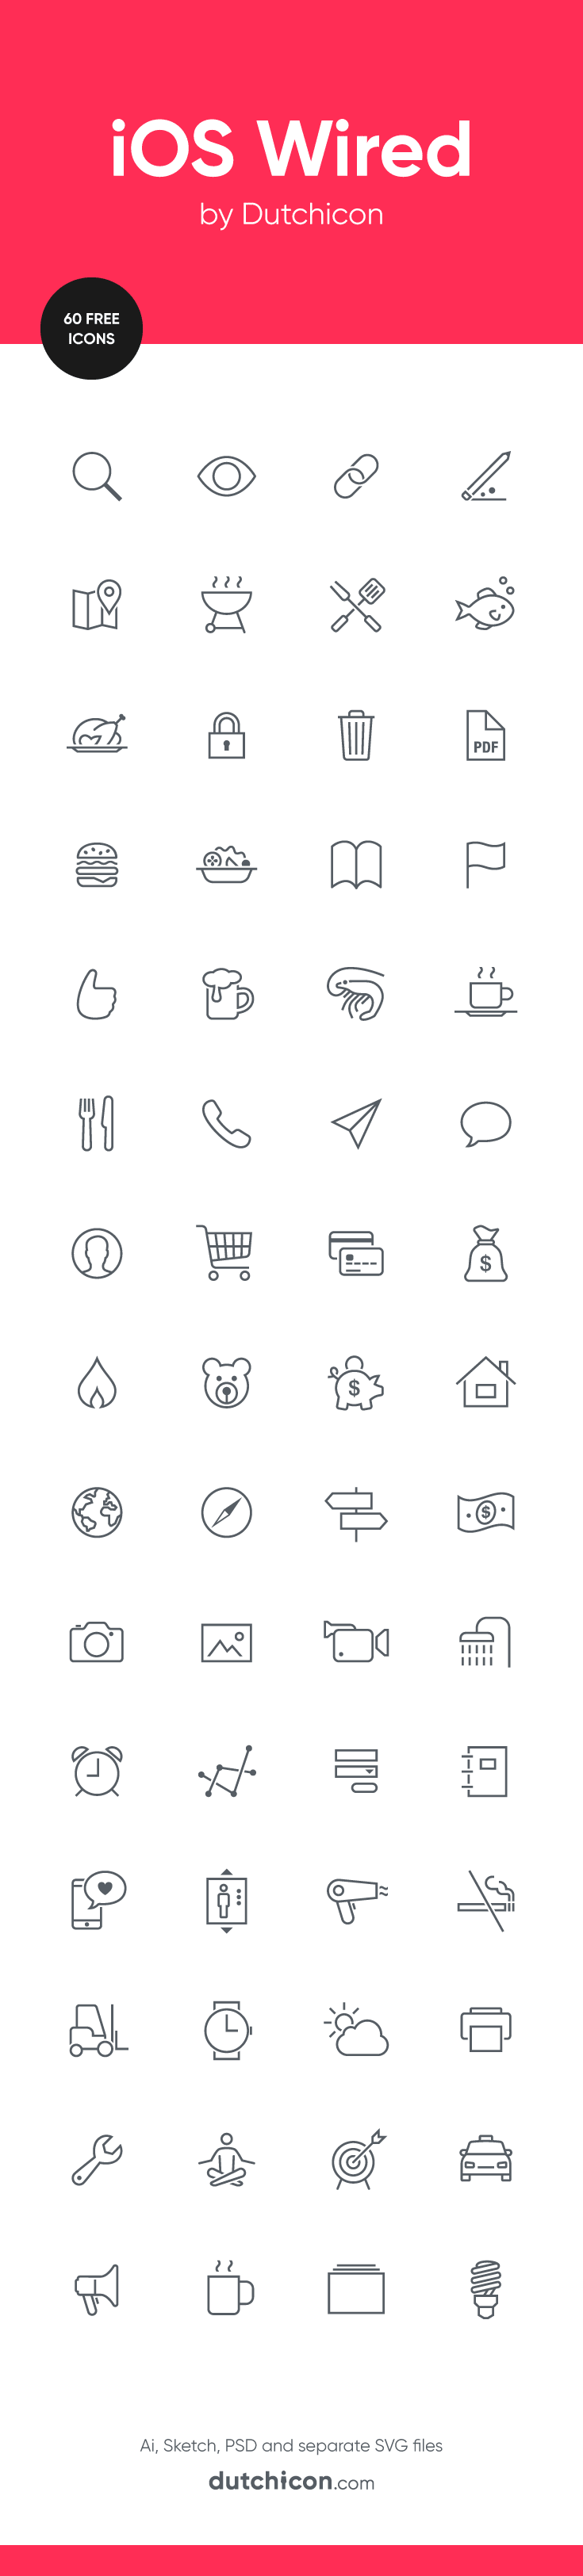 60 FREE icons in iOS Wired style available at Dutchicon.com. Direct download: https://dutchicon-store.myshopify.com/cart/31969714898:1?channel=buy_button